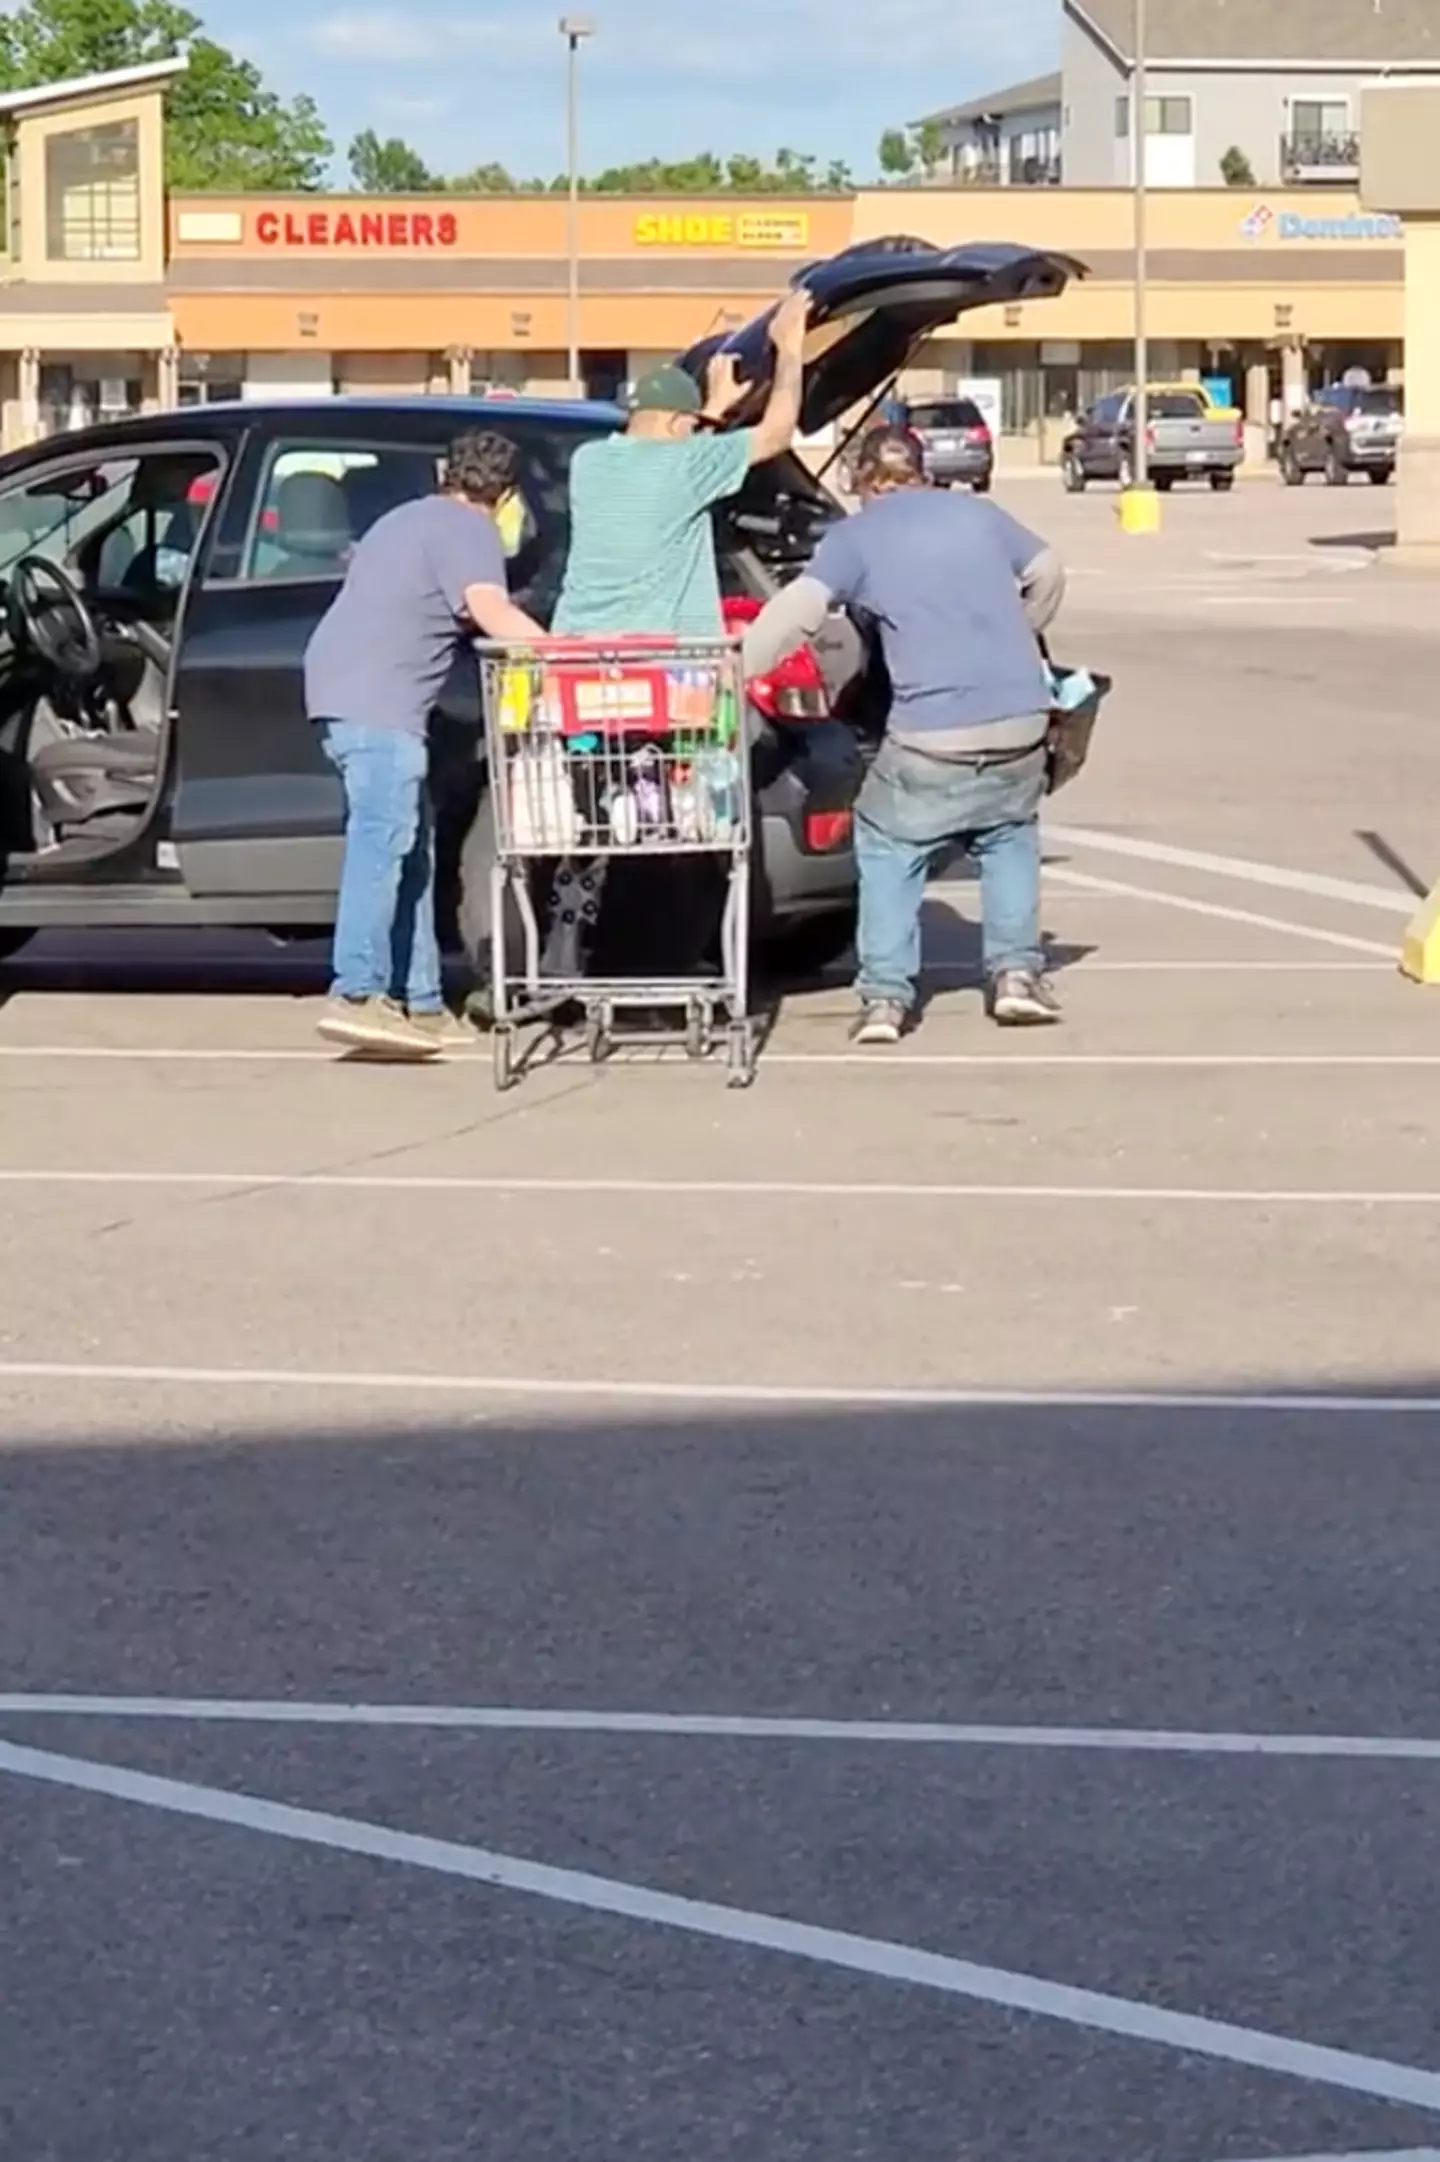 The three men were filmed loading their car with the stolen laundry detergent.